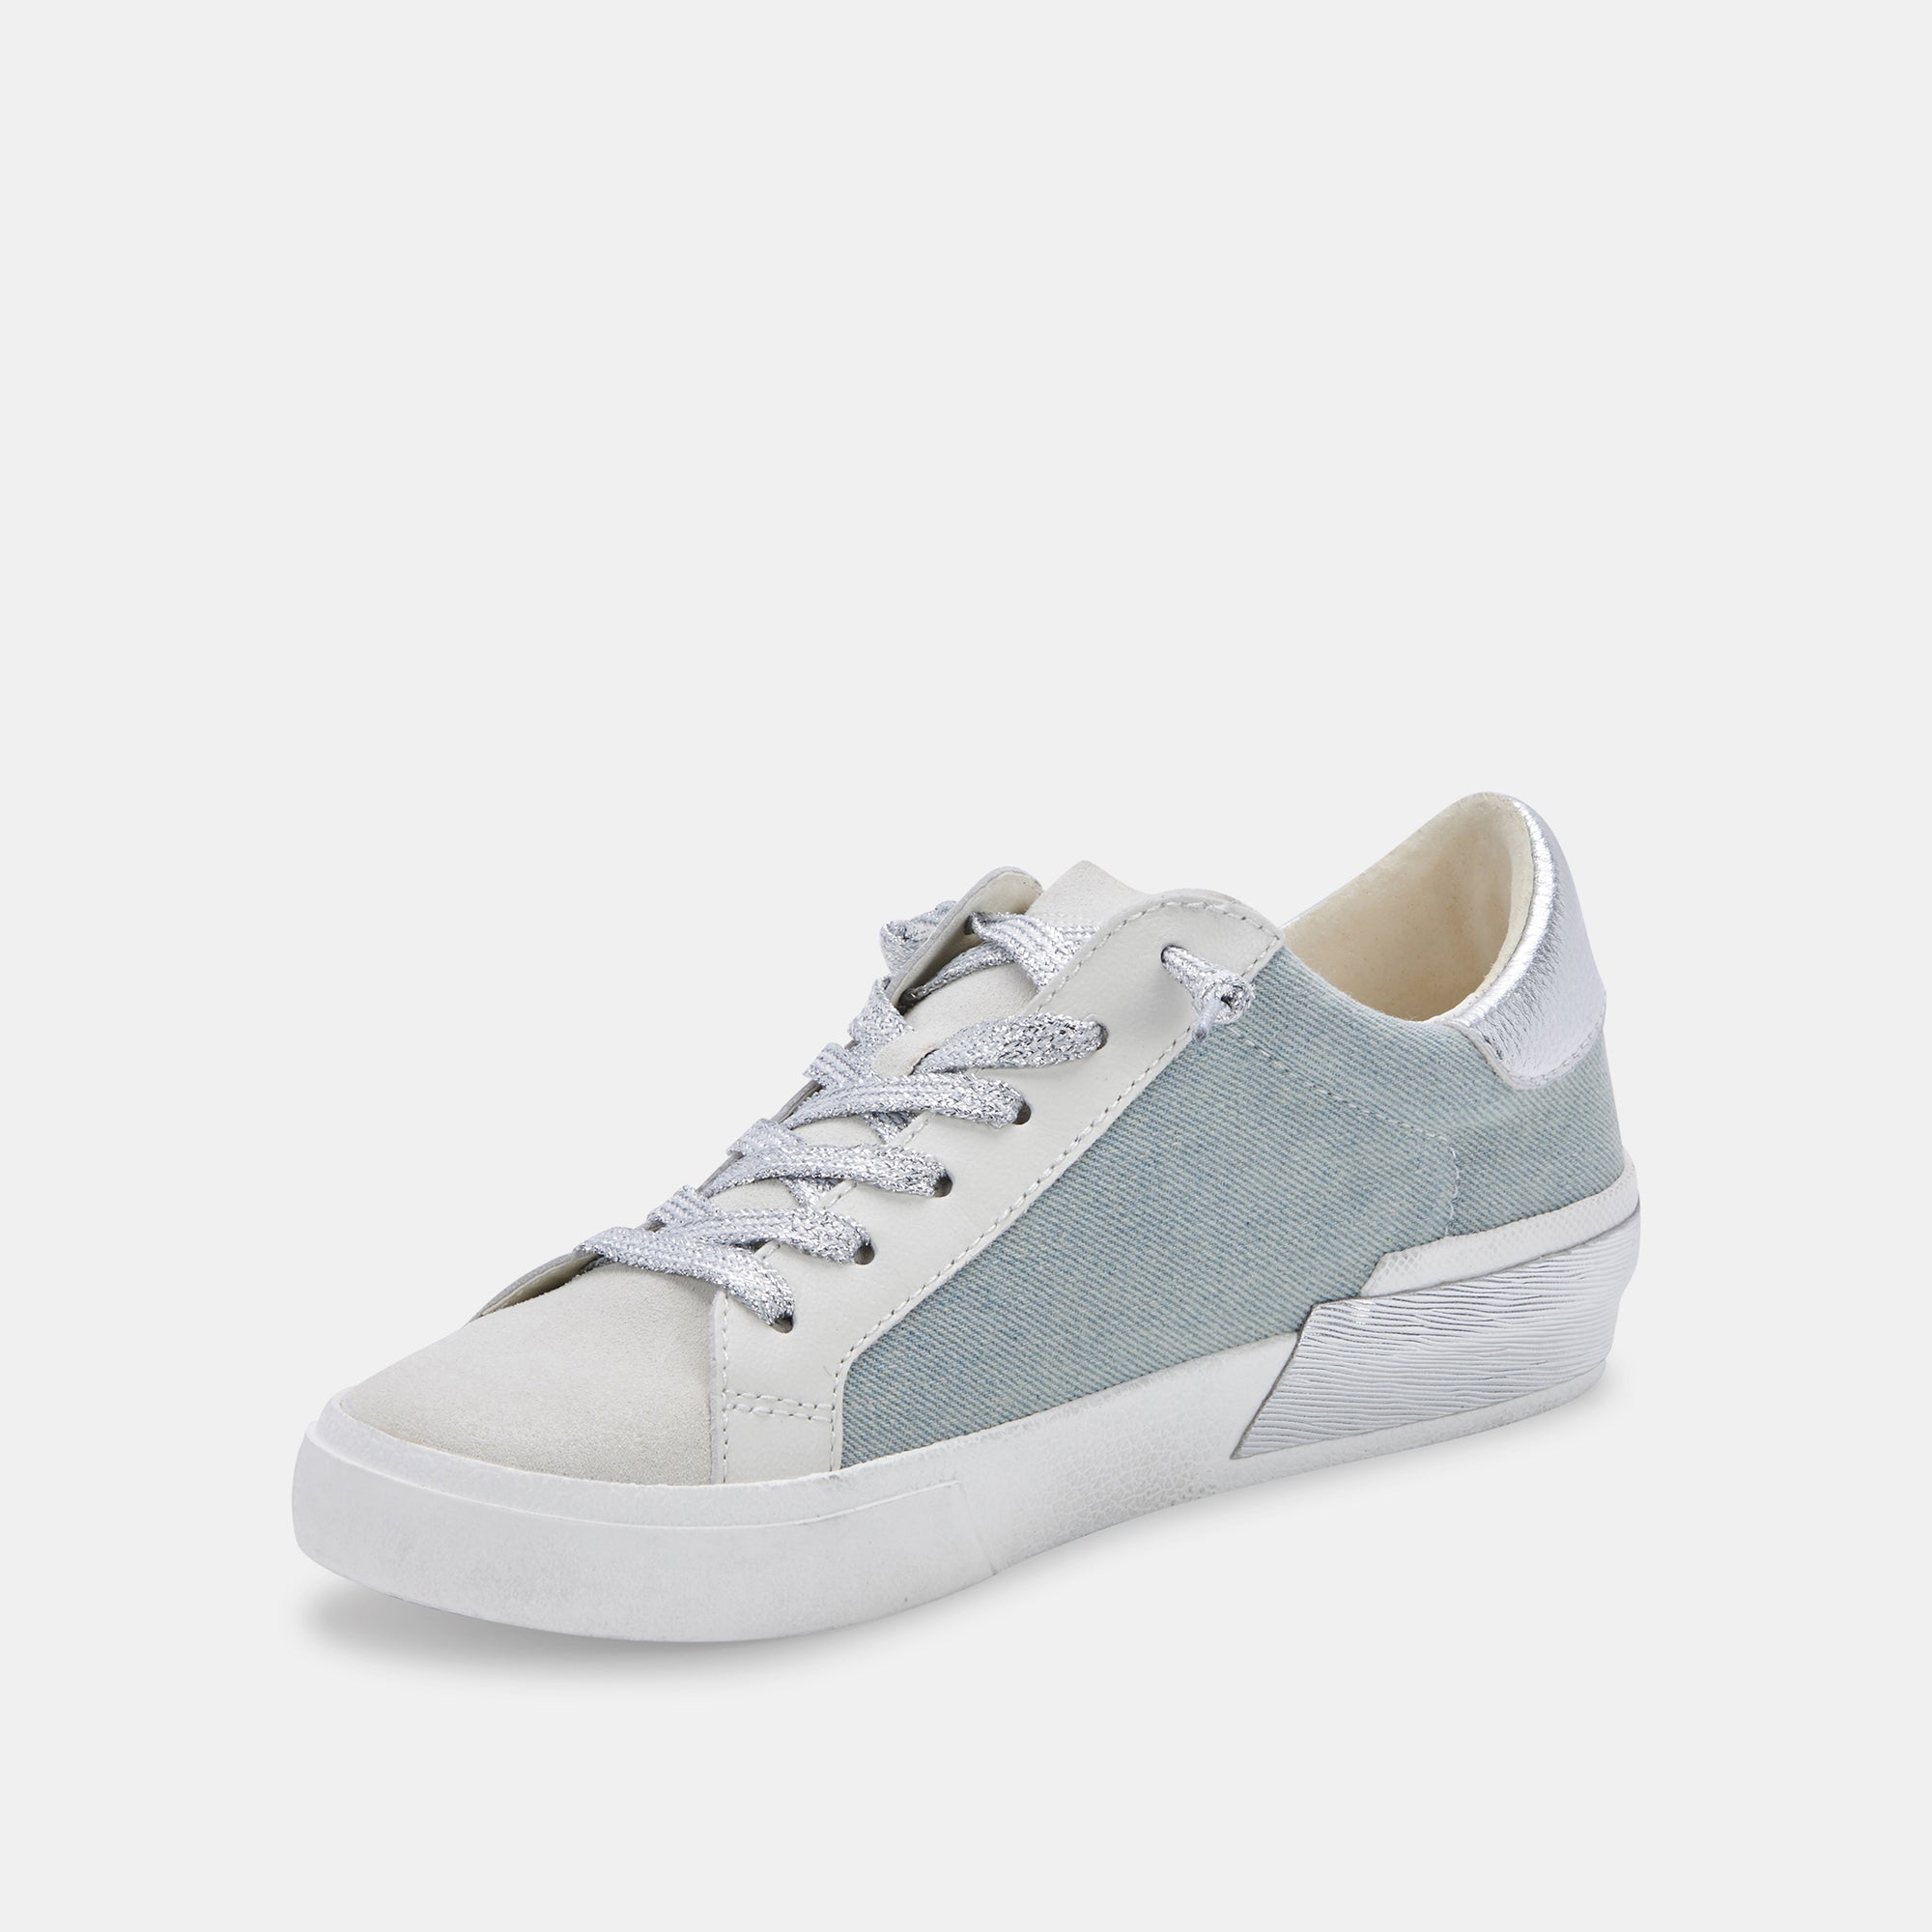 Dolce Vita: Zina Sneakers - Light Blue Denim – Sincerely Yours